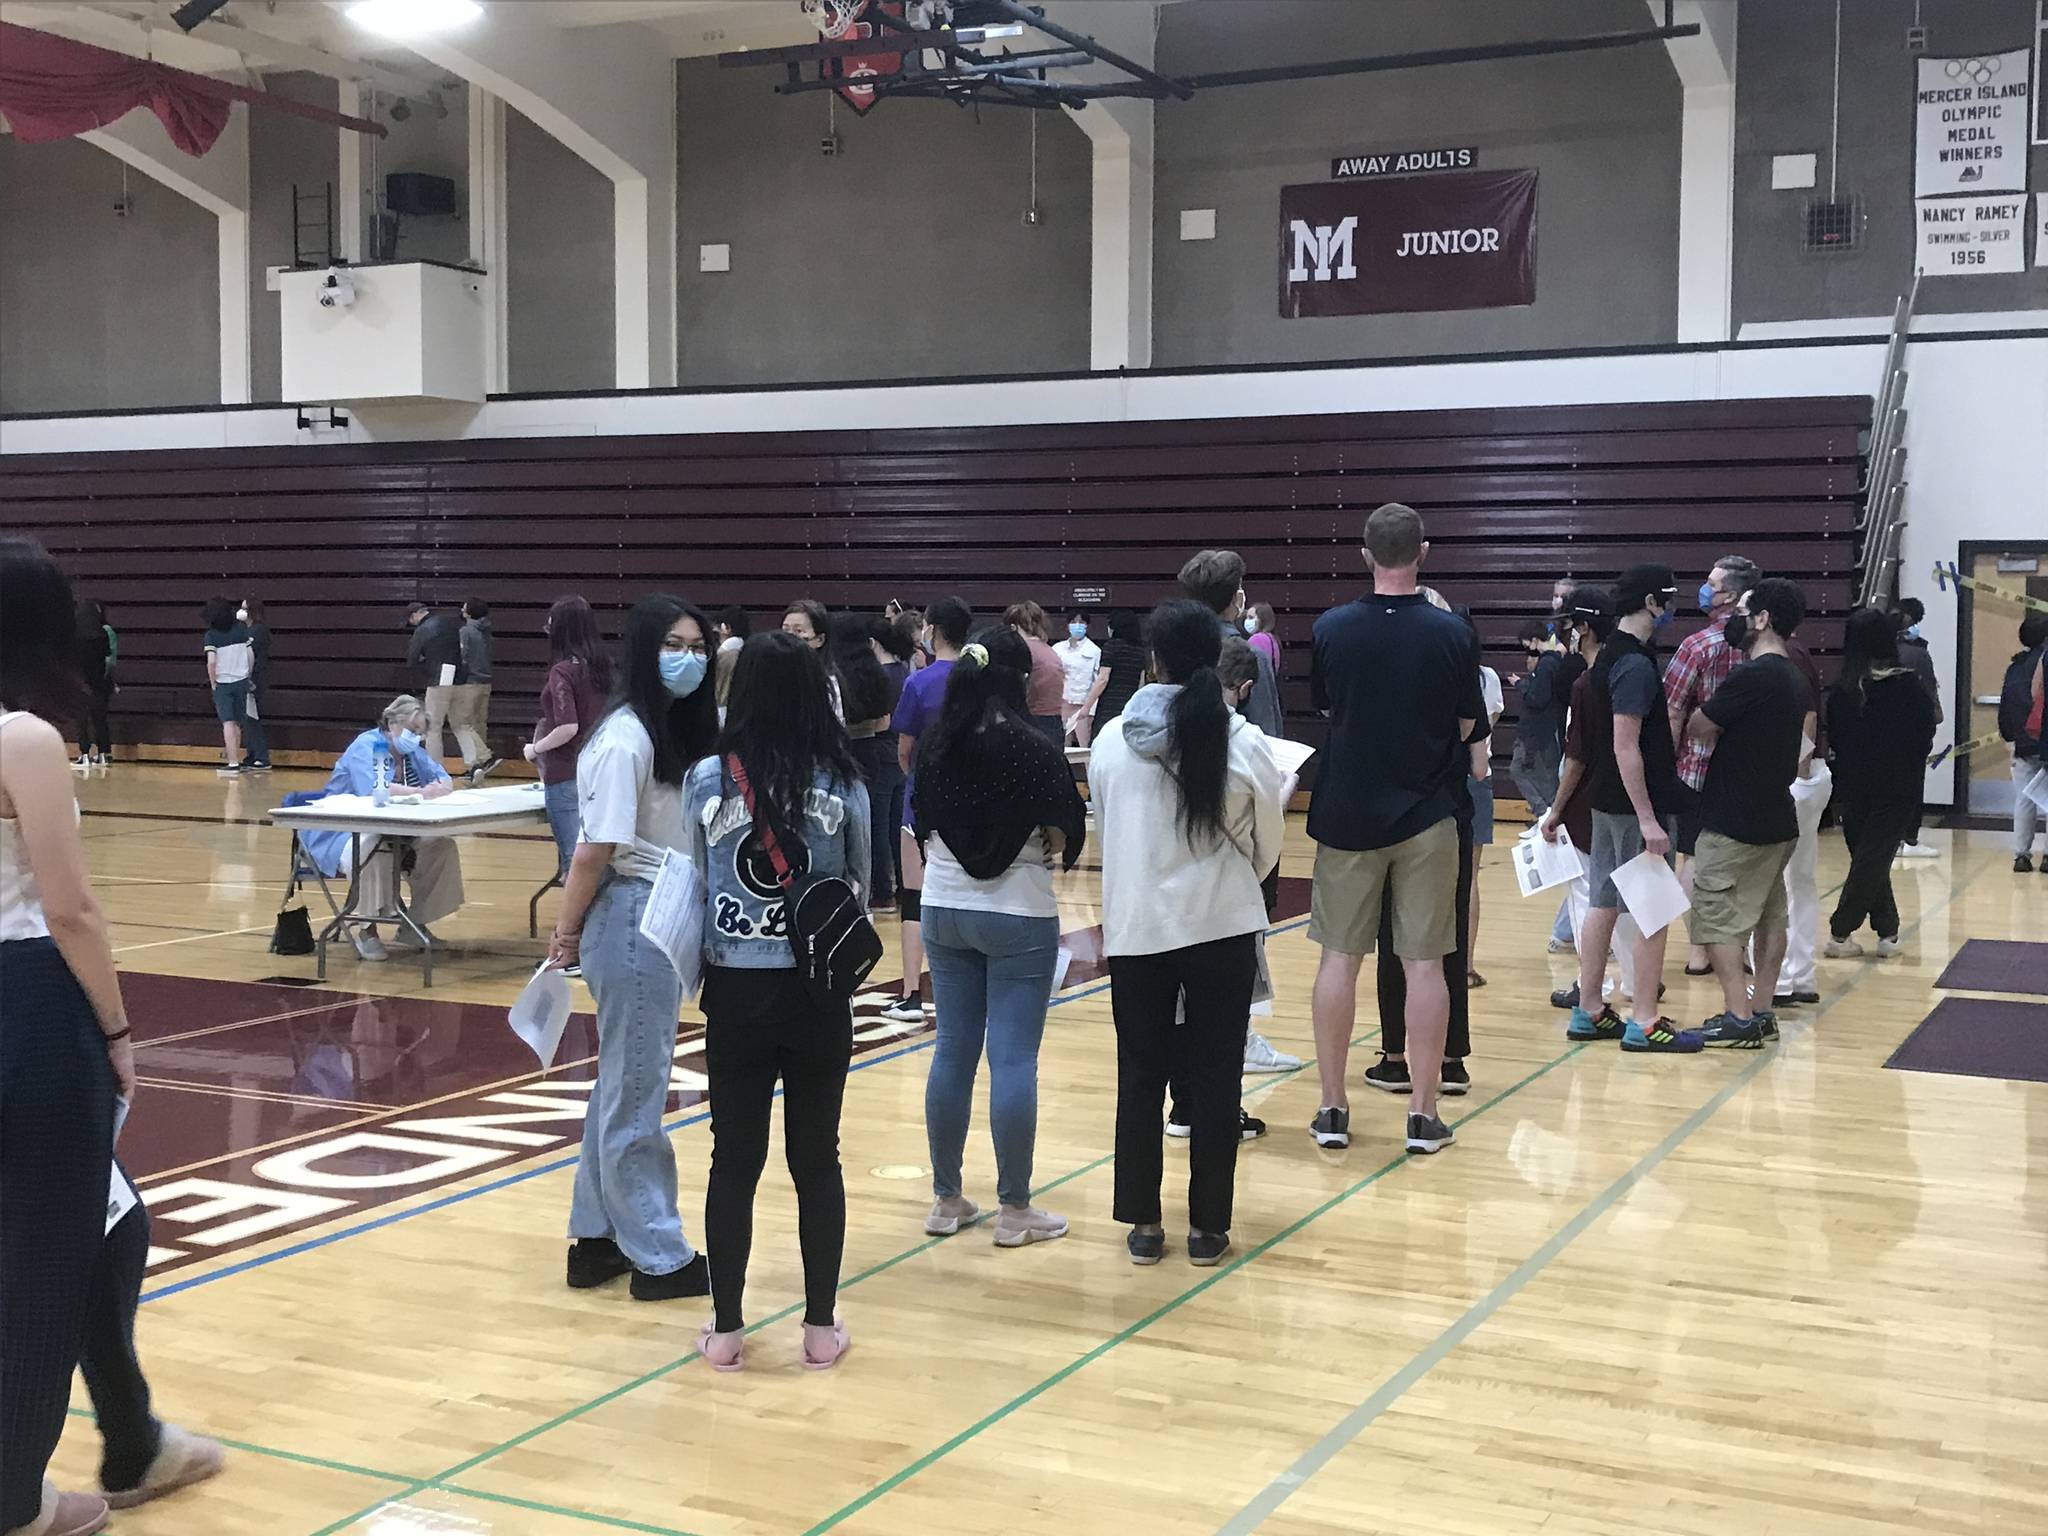 The Mercer Island School District hosted a COVID-19 Pfizer vaccine clinic, in partnership with Costco Pharmacies, from 8 a.m. to noon on May 15 at Mercer Island High School. About 870 people were vaccinated, many of them newly-eligible 12- to 15-year-olds. “We are very thankful for our partnership with Costco Pharmacies and for the parents and community members who volunteered to make this clinic possible,” reads a press release. Photo courtesy of the Mercer Island School District